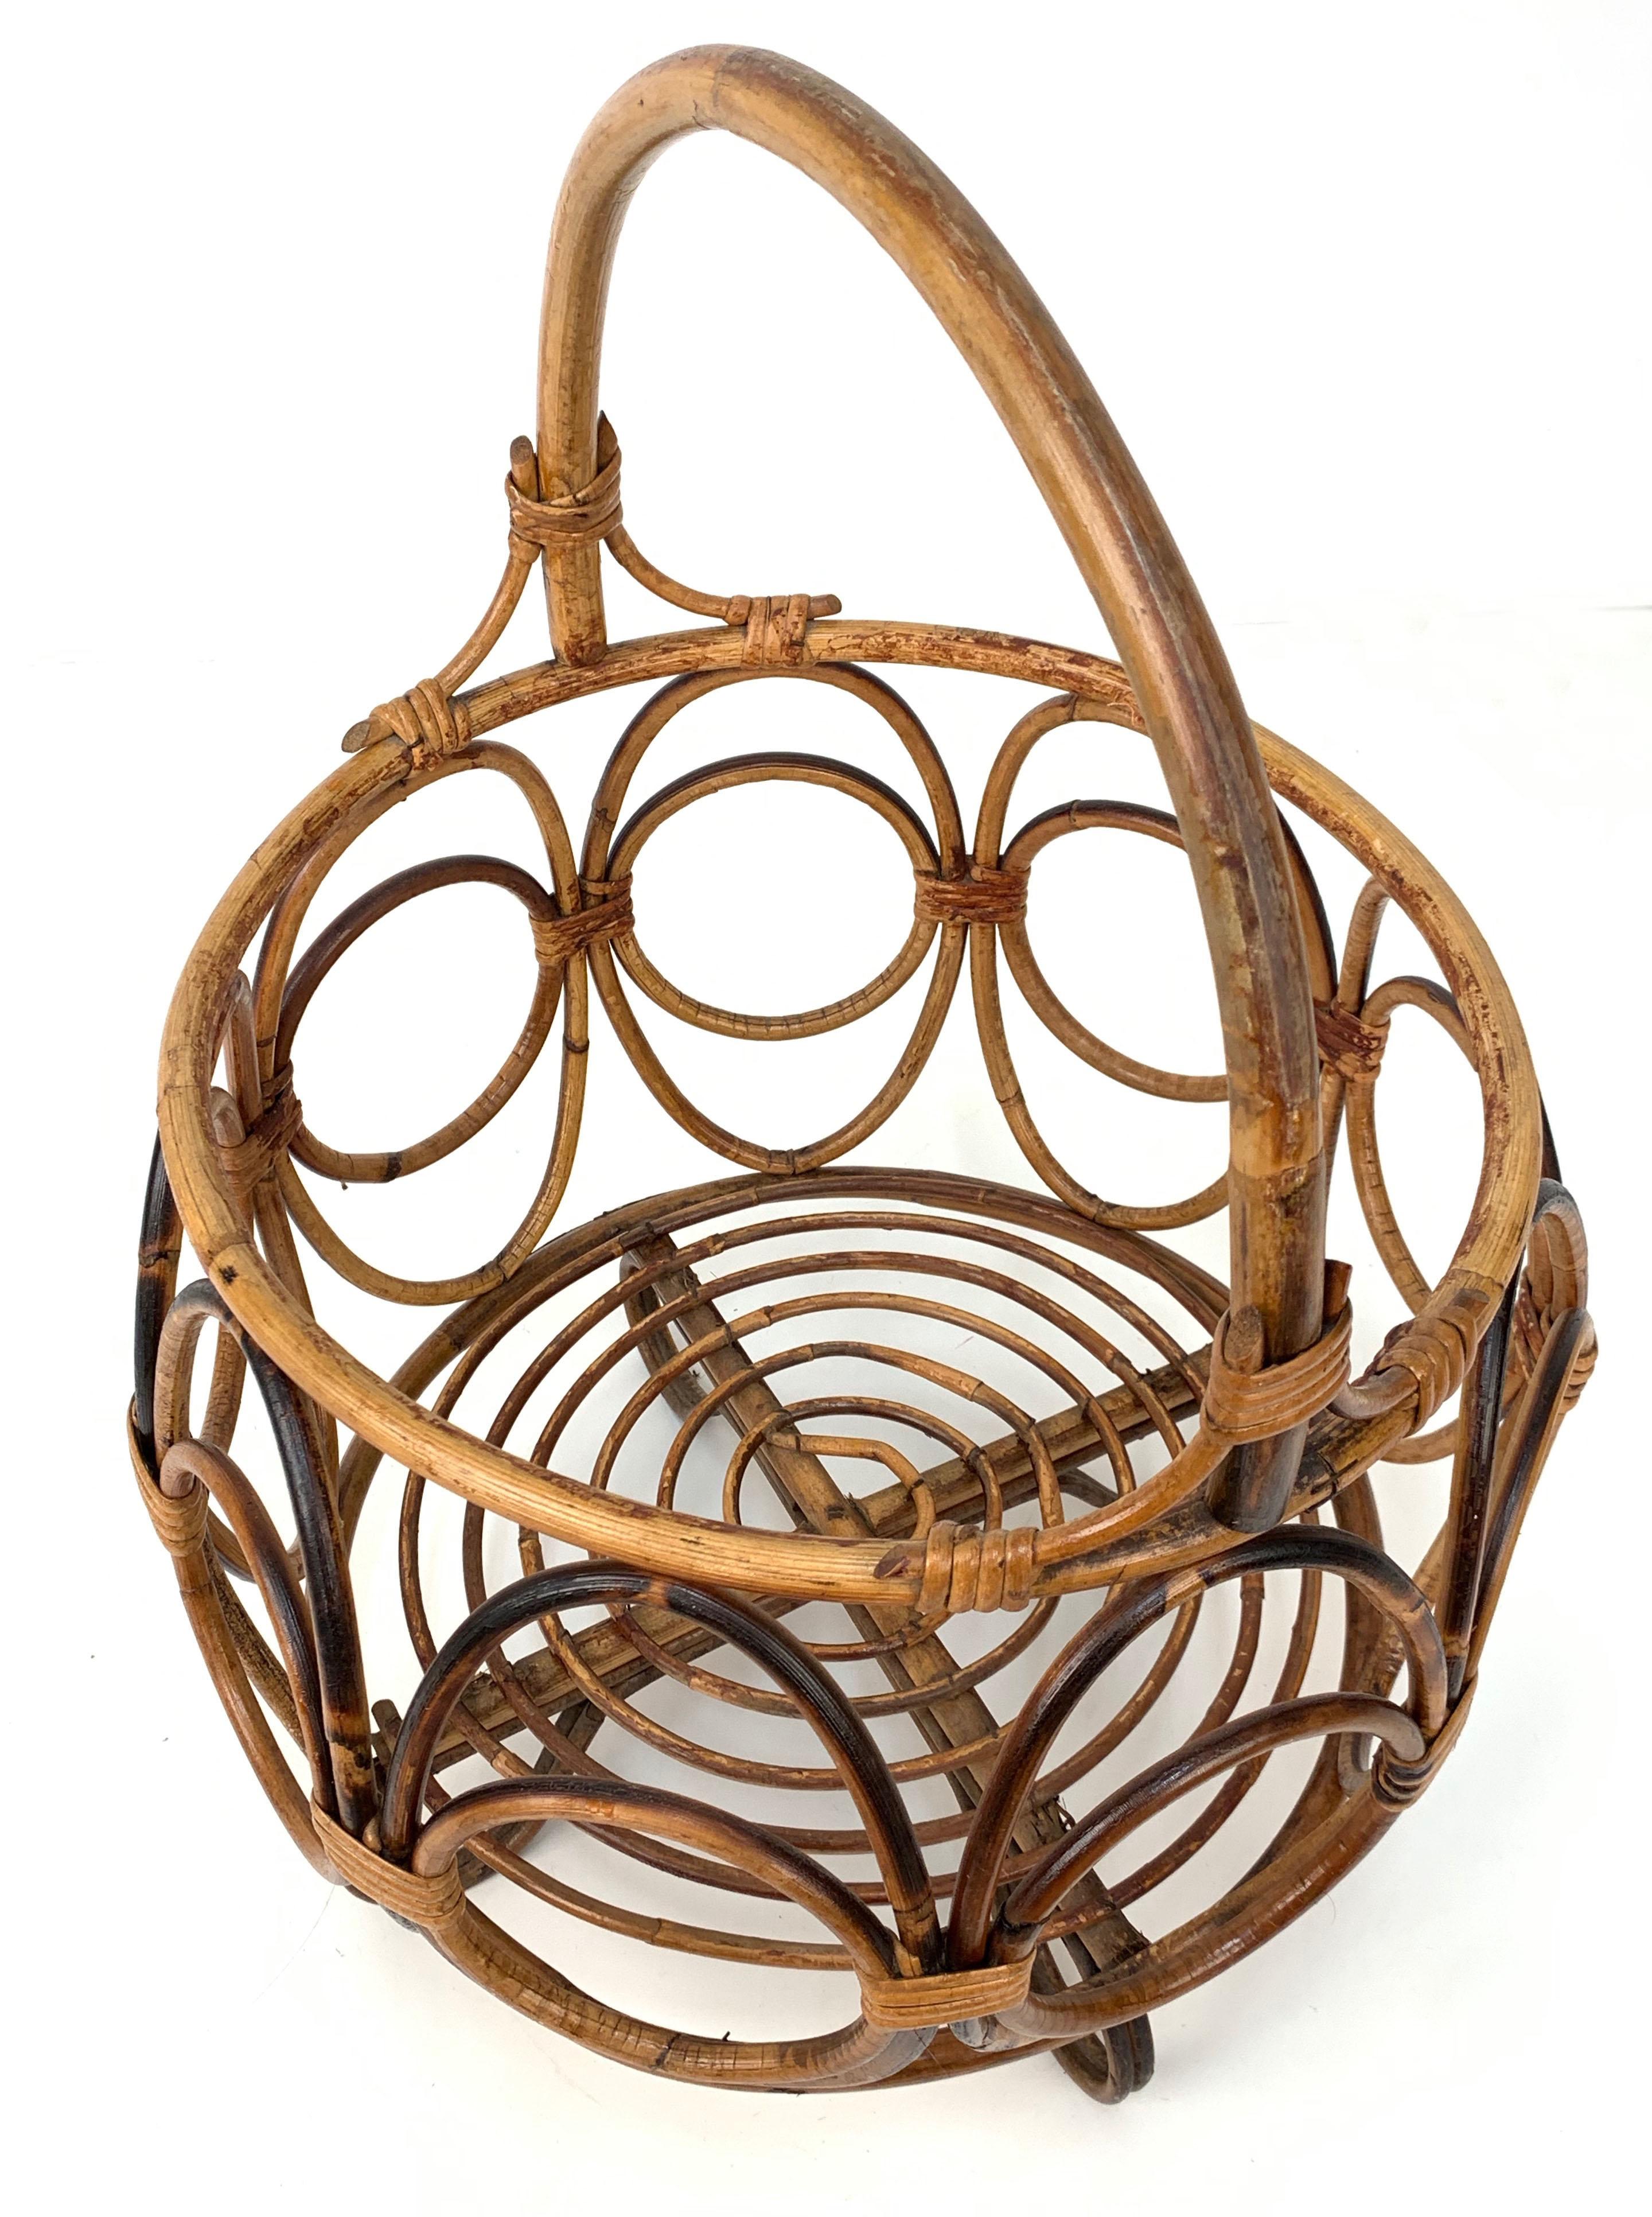 Midcentury French Riviera Bamboo and Rattan Italian Round Magazine Rack, 1960s For Sale 7